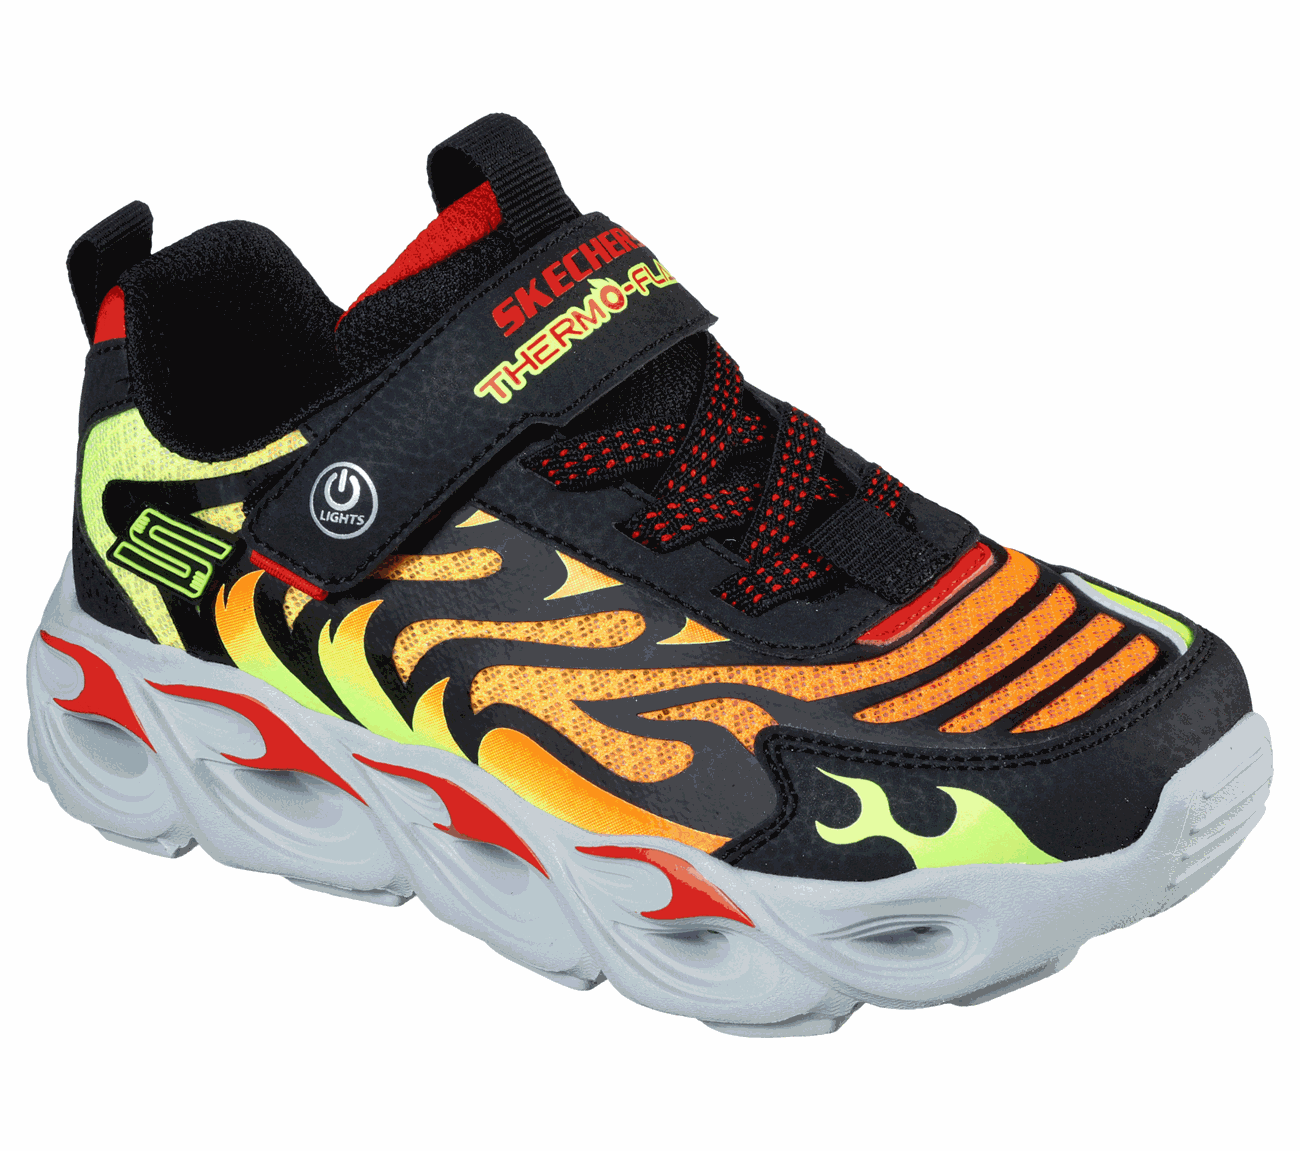 Thermo-Flash SKECHERS S-Lights Shoes